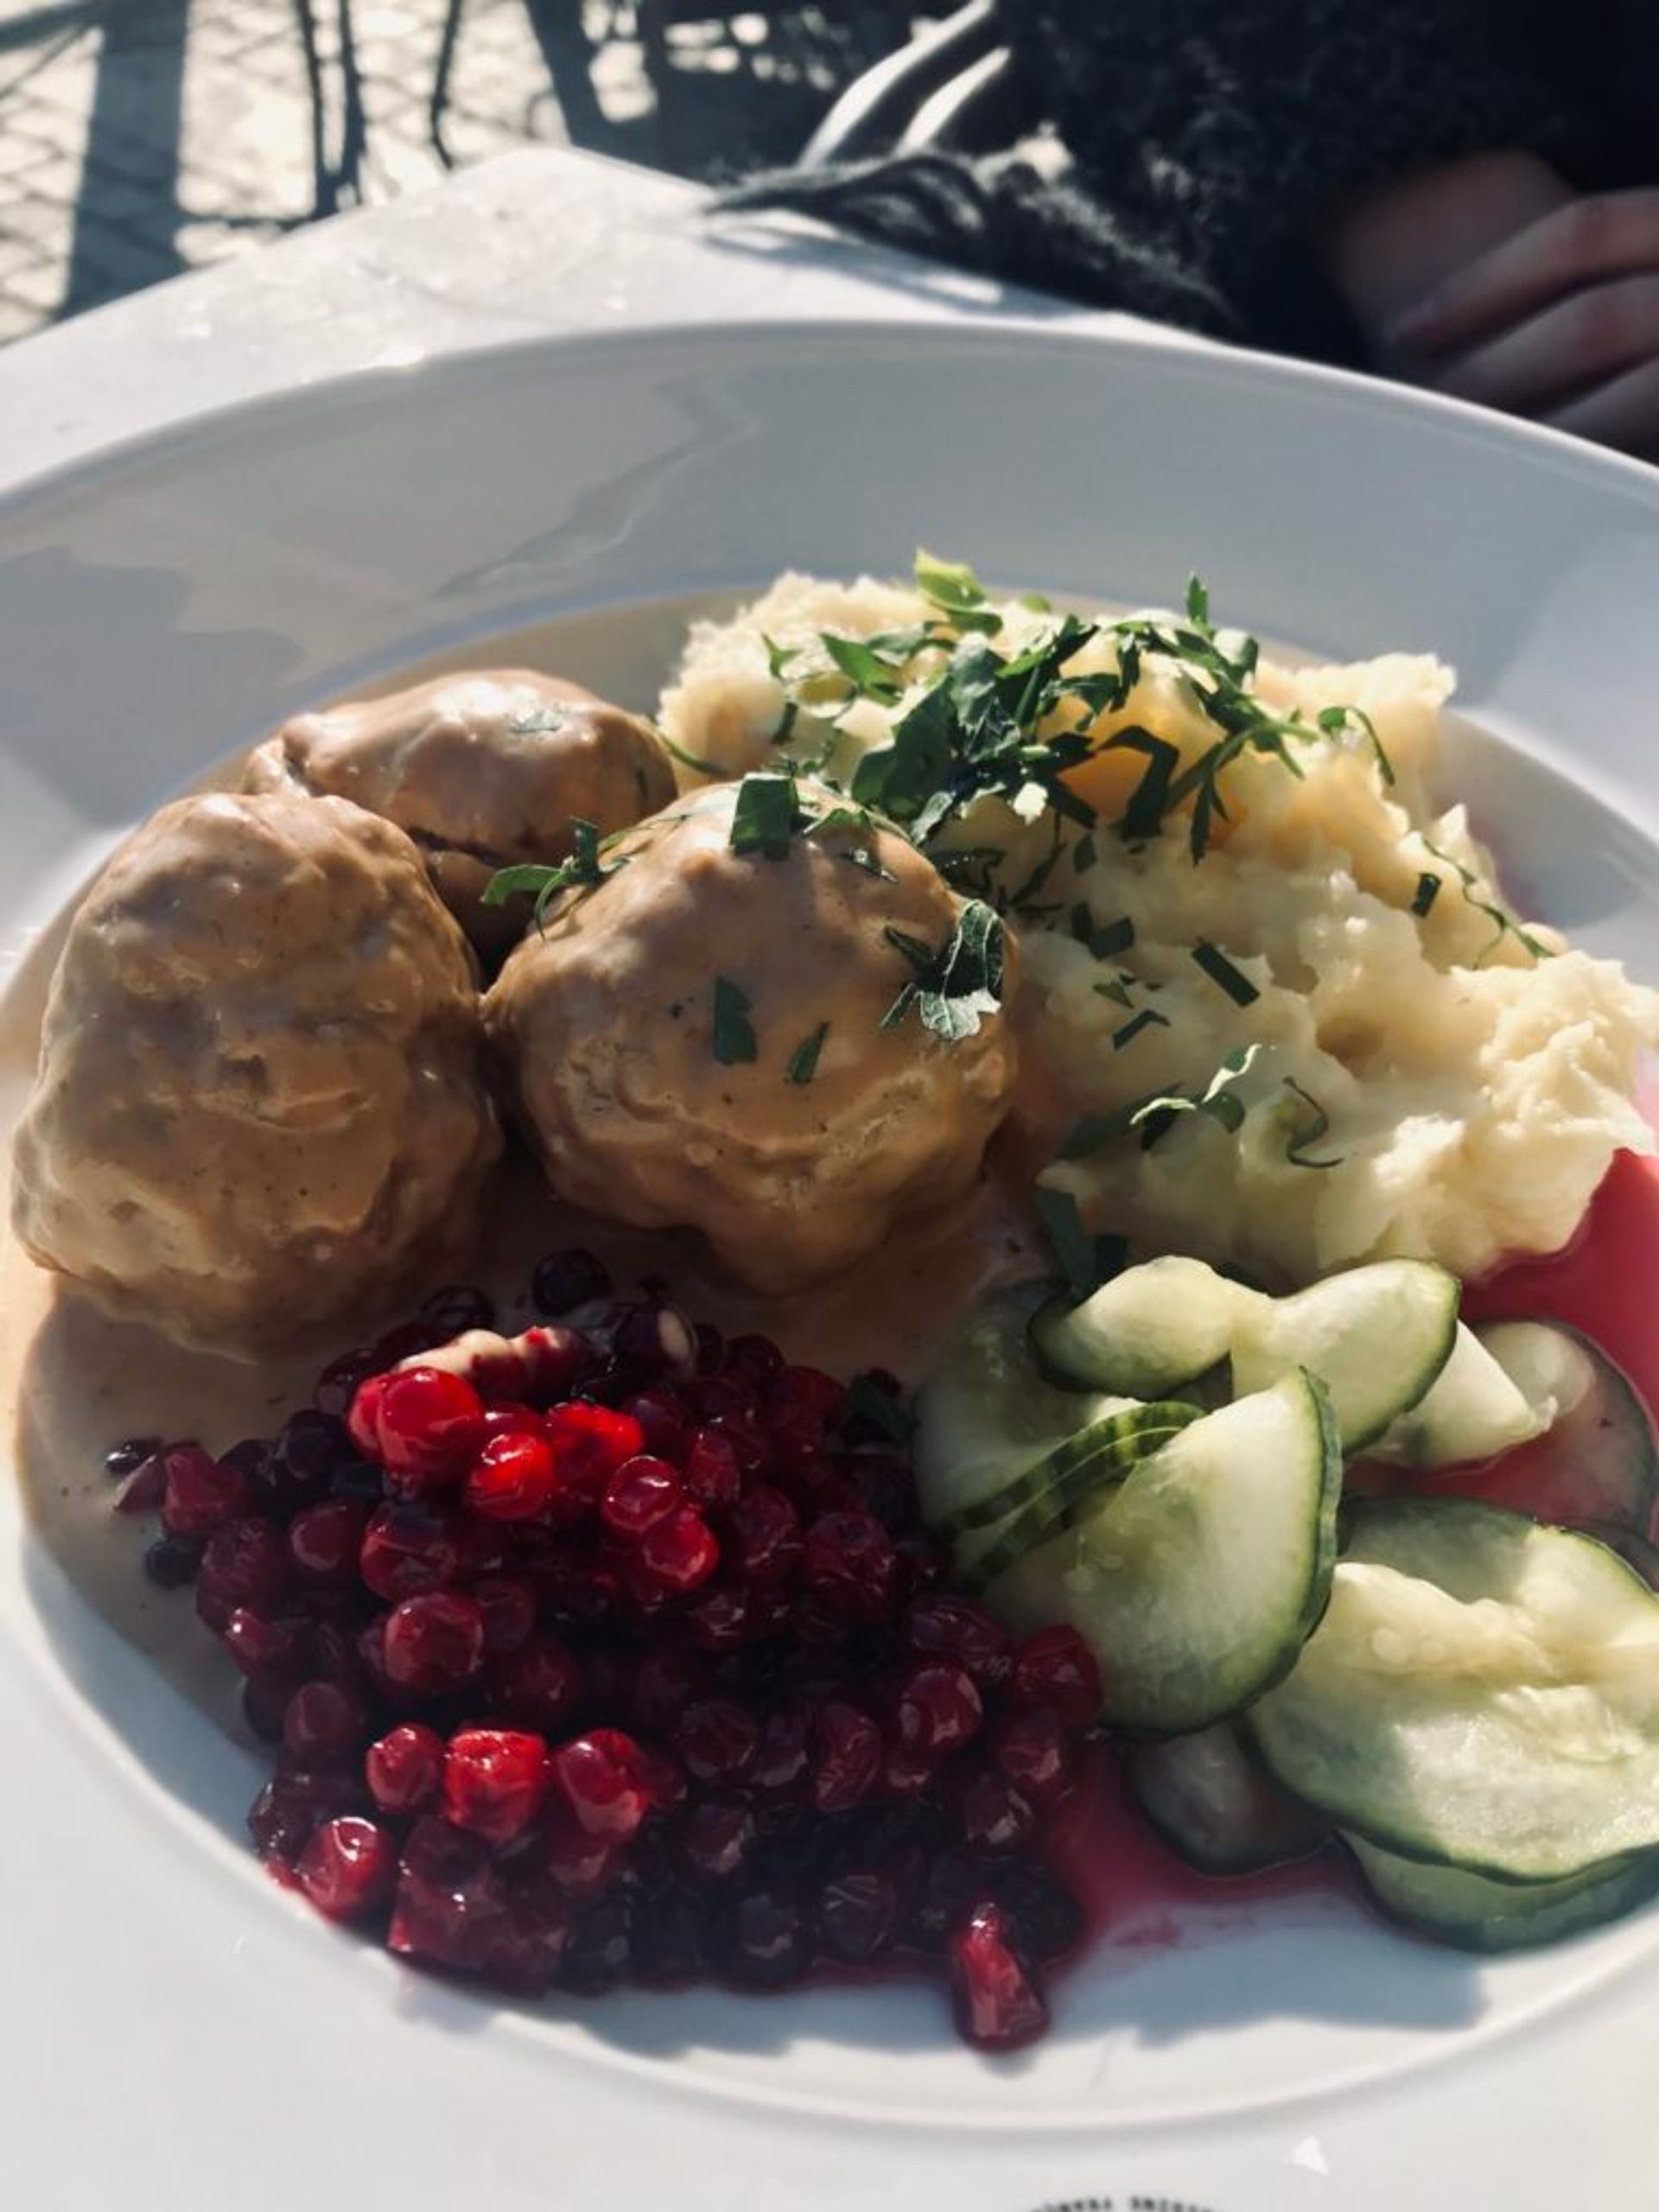 A plate of traditional Swedish meatballs.